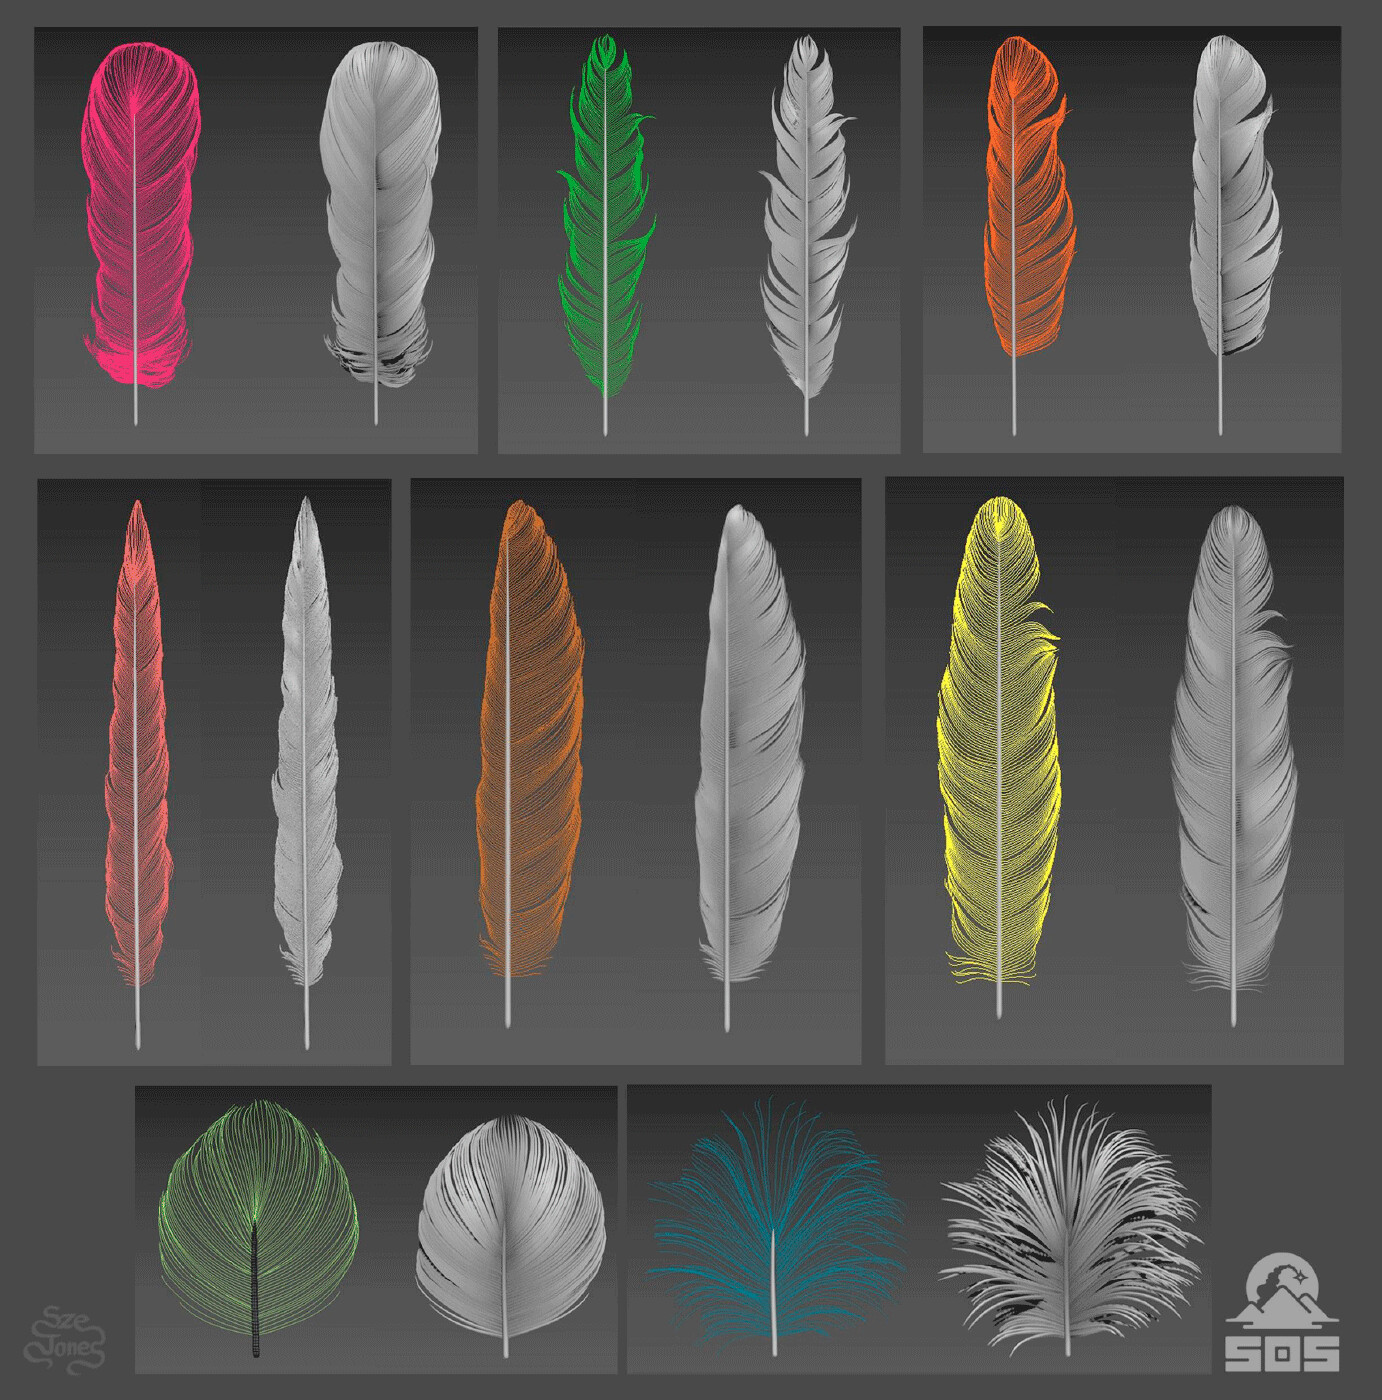 Master Feather Splines for Hair Cards Generation